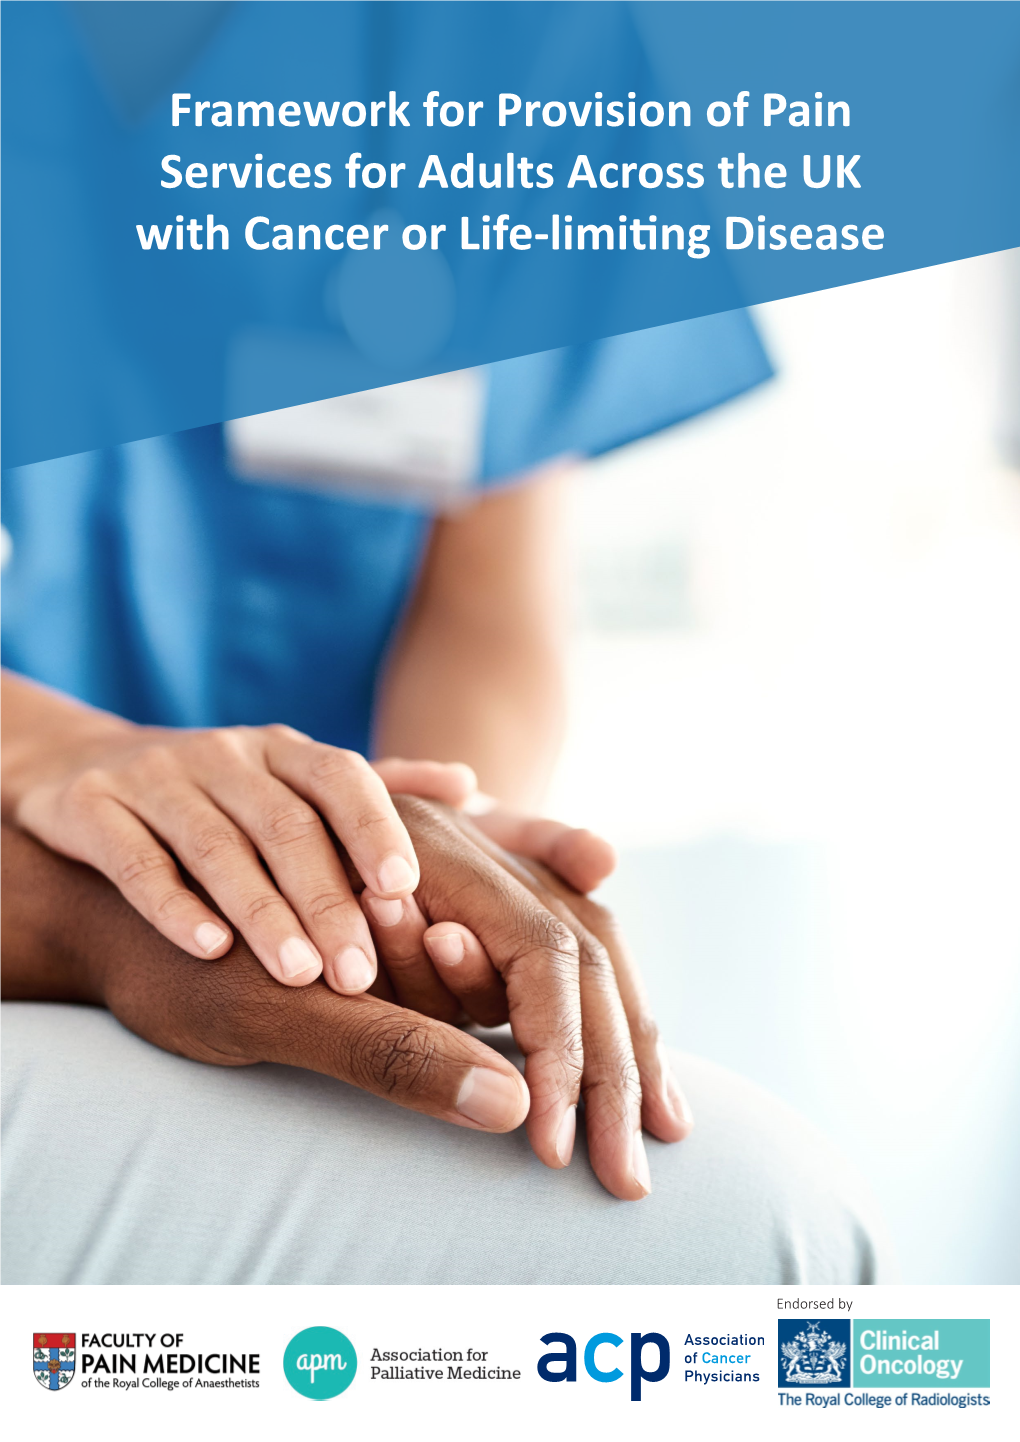 Framework for Pain Services for Cancer and Life-Limiting Disease